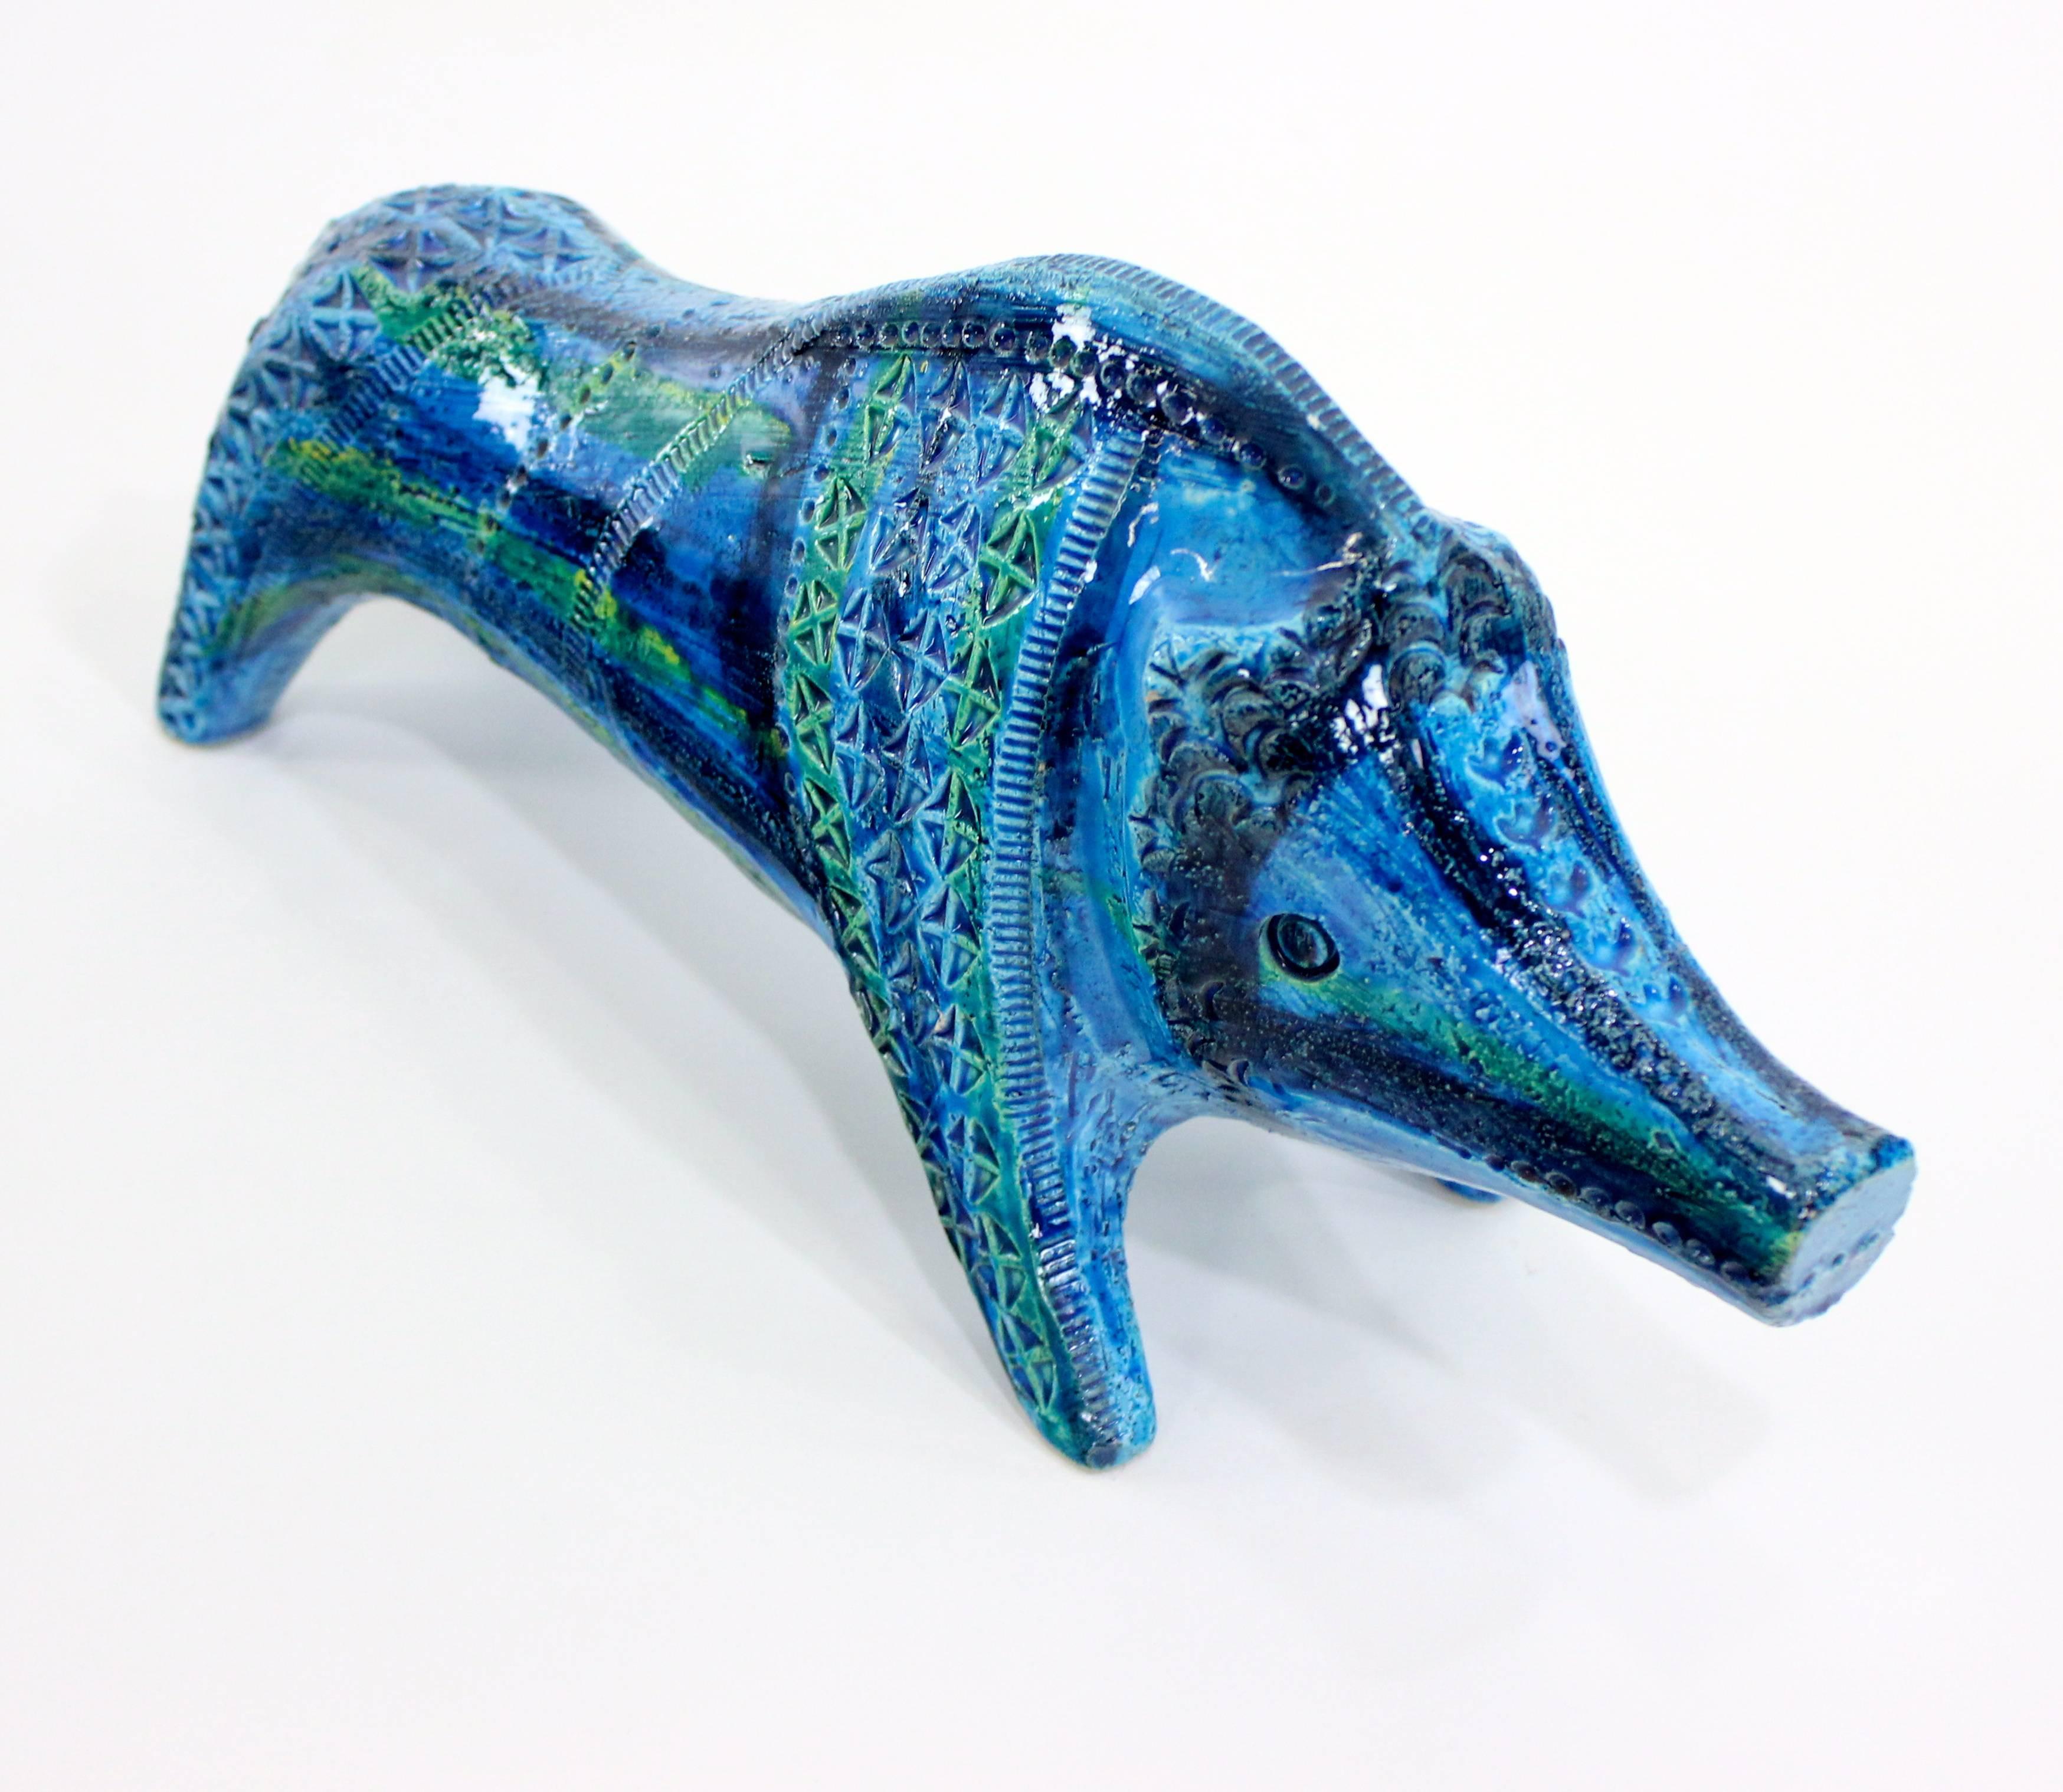 "Remini Blue" wild boar by Aldo Londi for Bitossi.
Circa 1960.
Bright turquoise and green glazed ceramic.
Matchless quality and price.
Low freight and quick ship.